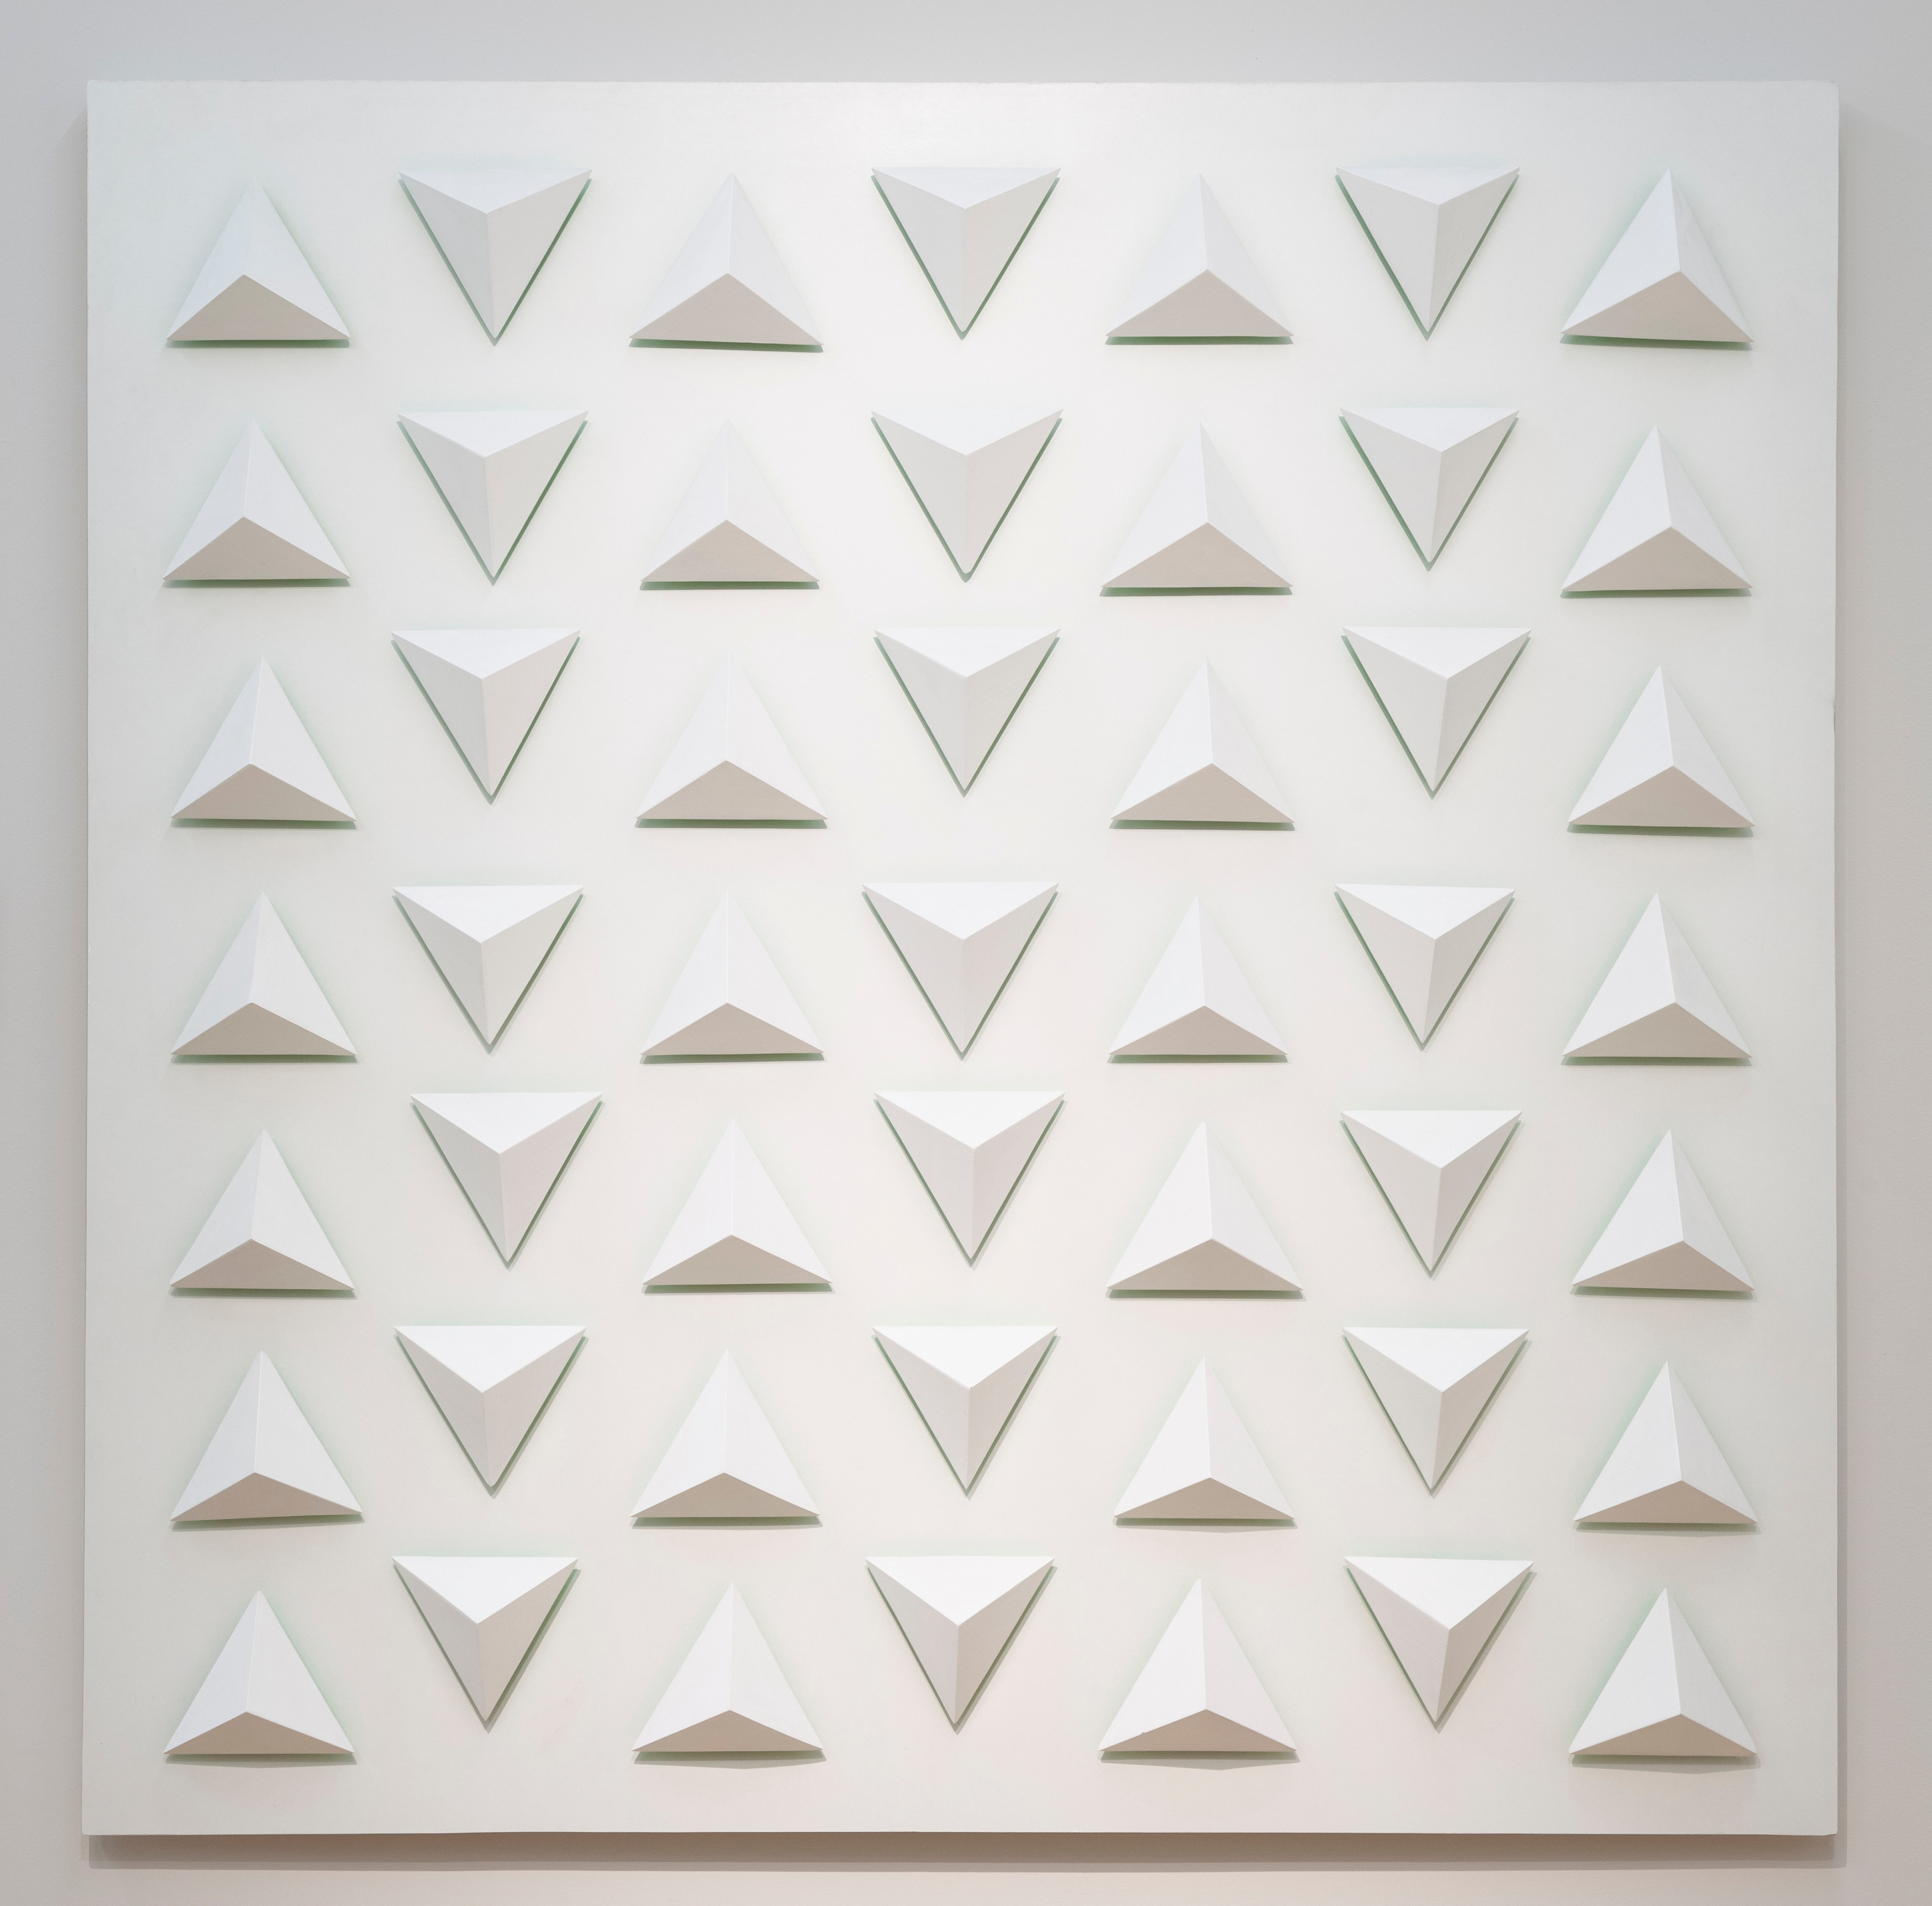 Luis Tomasello, Atmosph&egrave;re chromoplastique N&deg; 1029, 2013. Painting, acrylic and wood, 53 1/4 x 53 1/4 in.